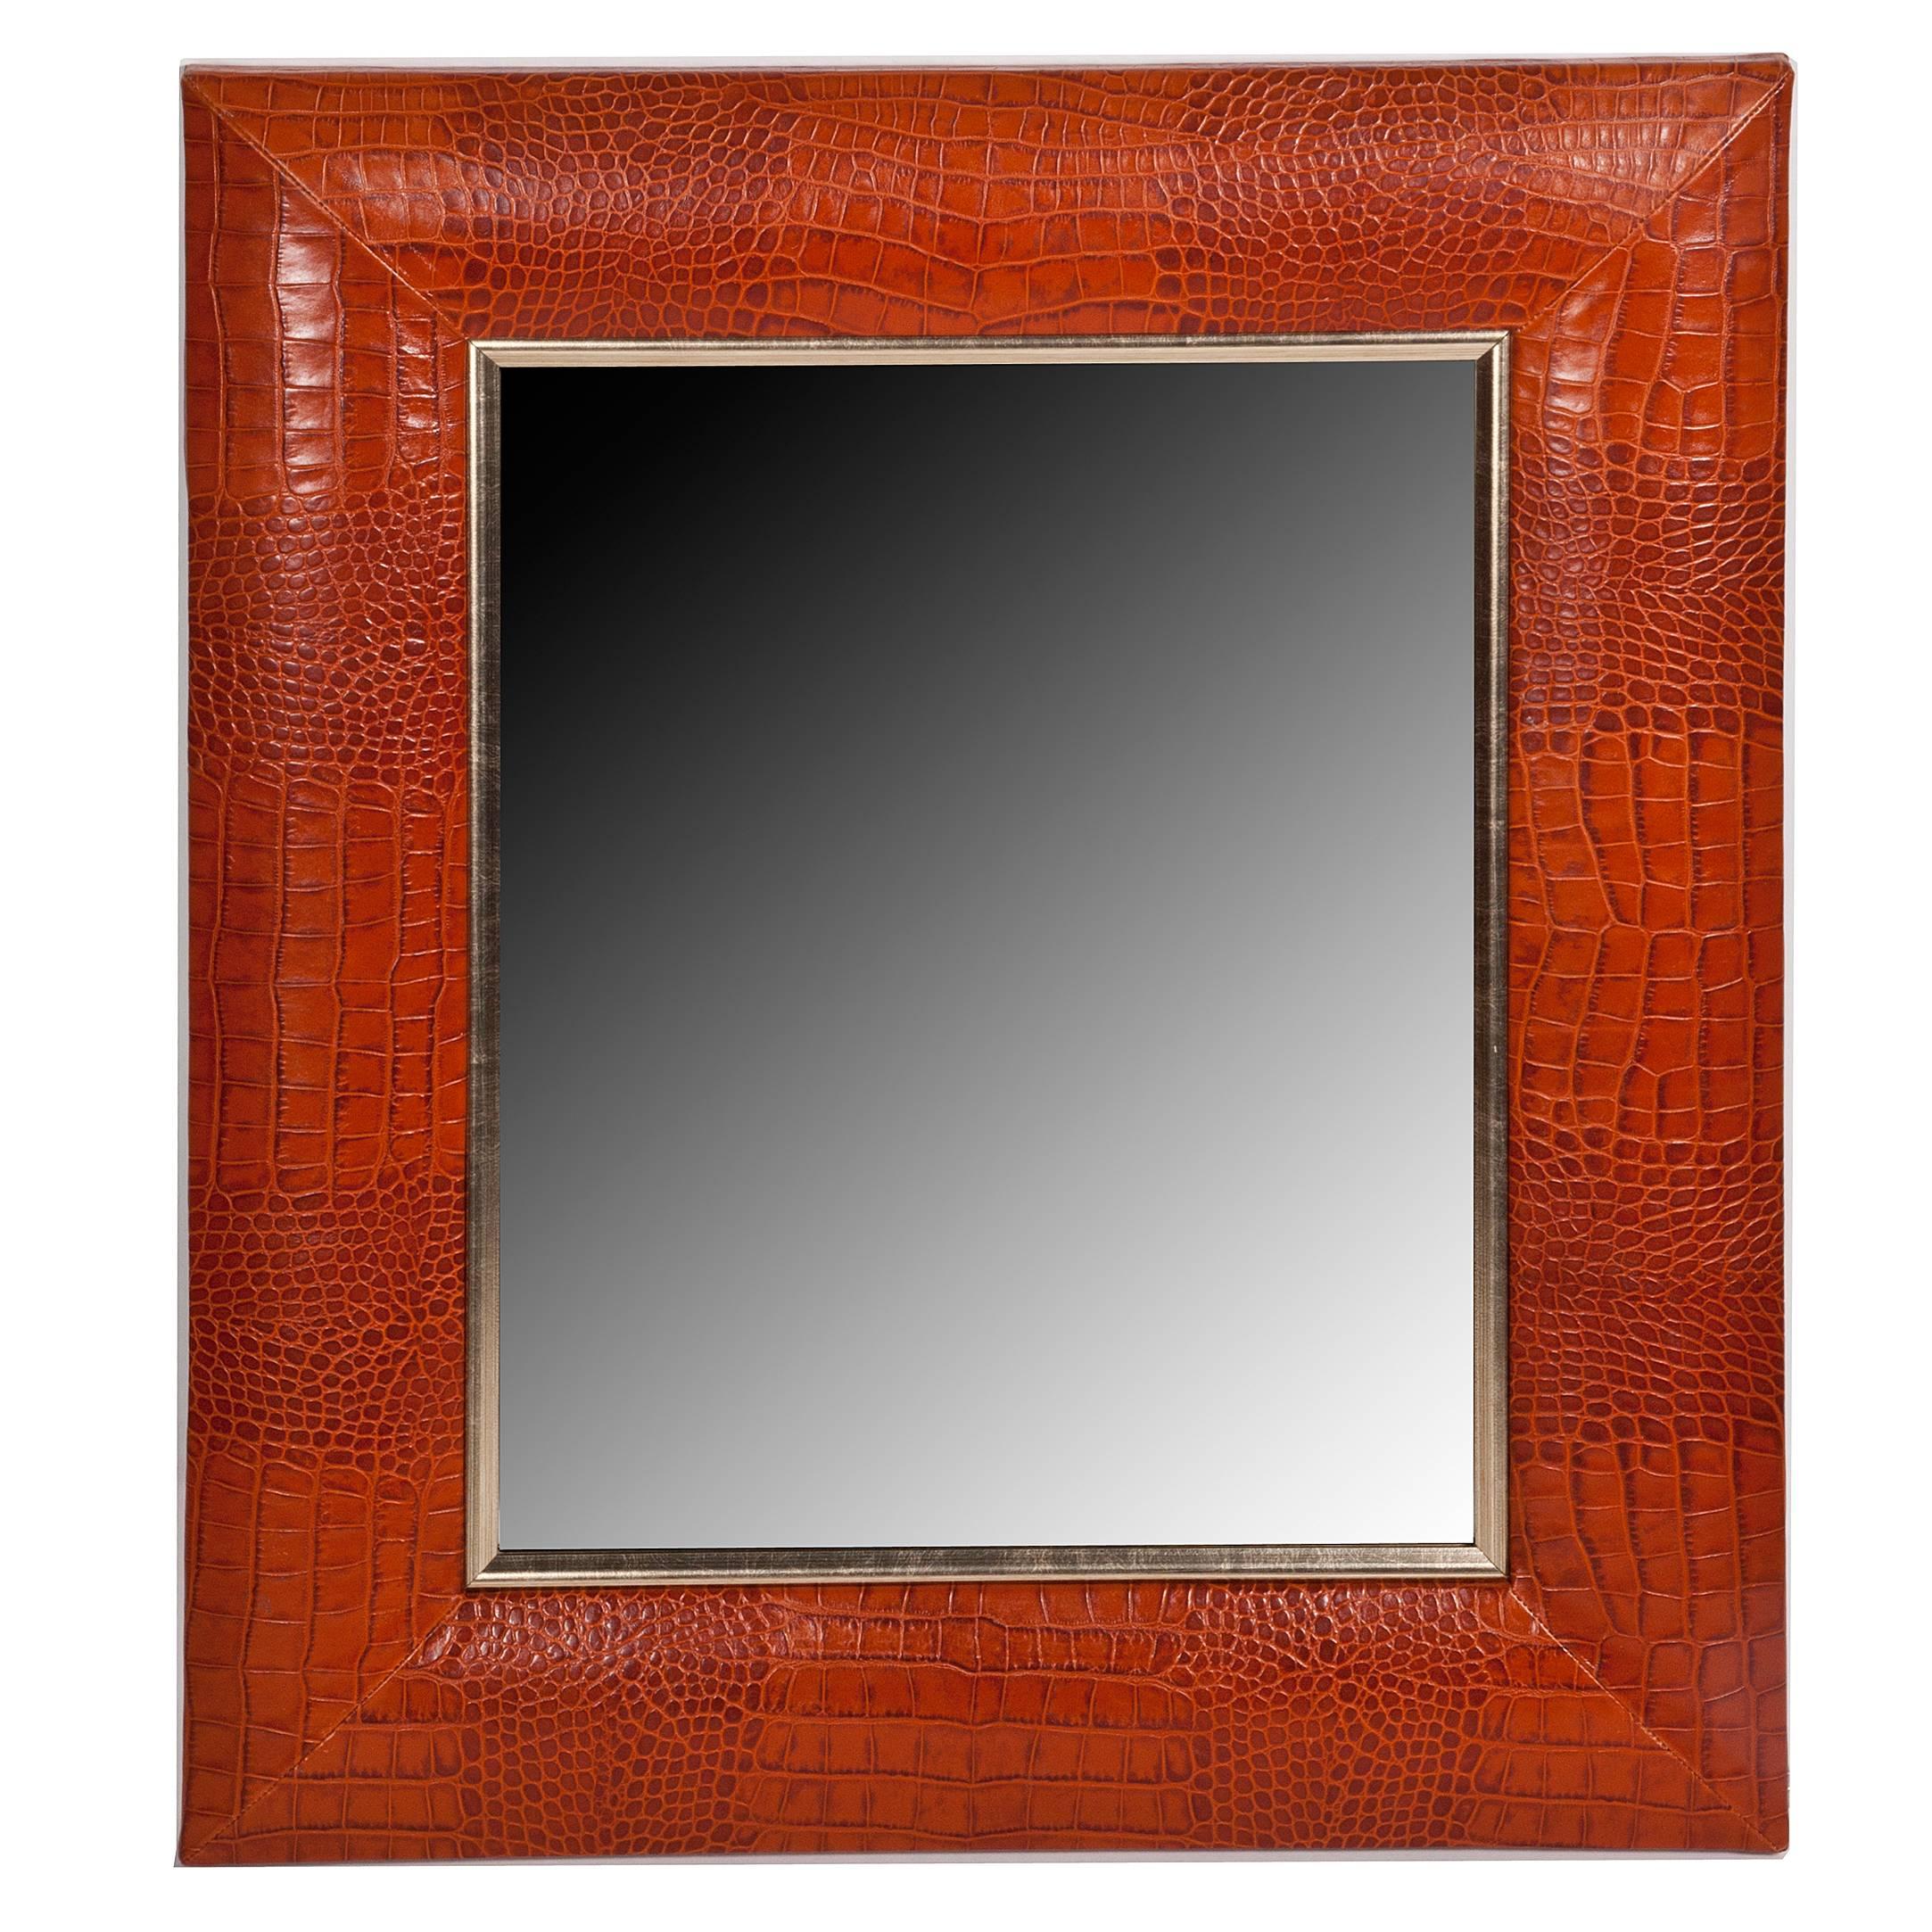 Contemporary Cogna Croc Leather Framed Mirror with Champagne Gold Detailing For Sale